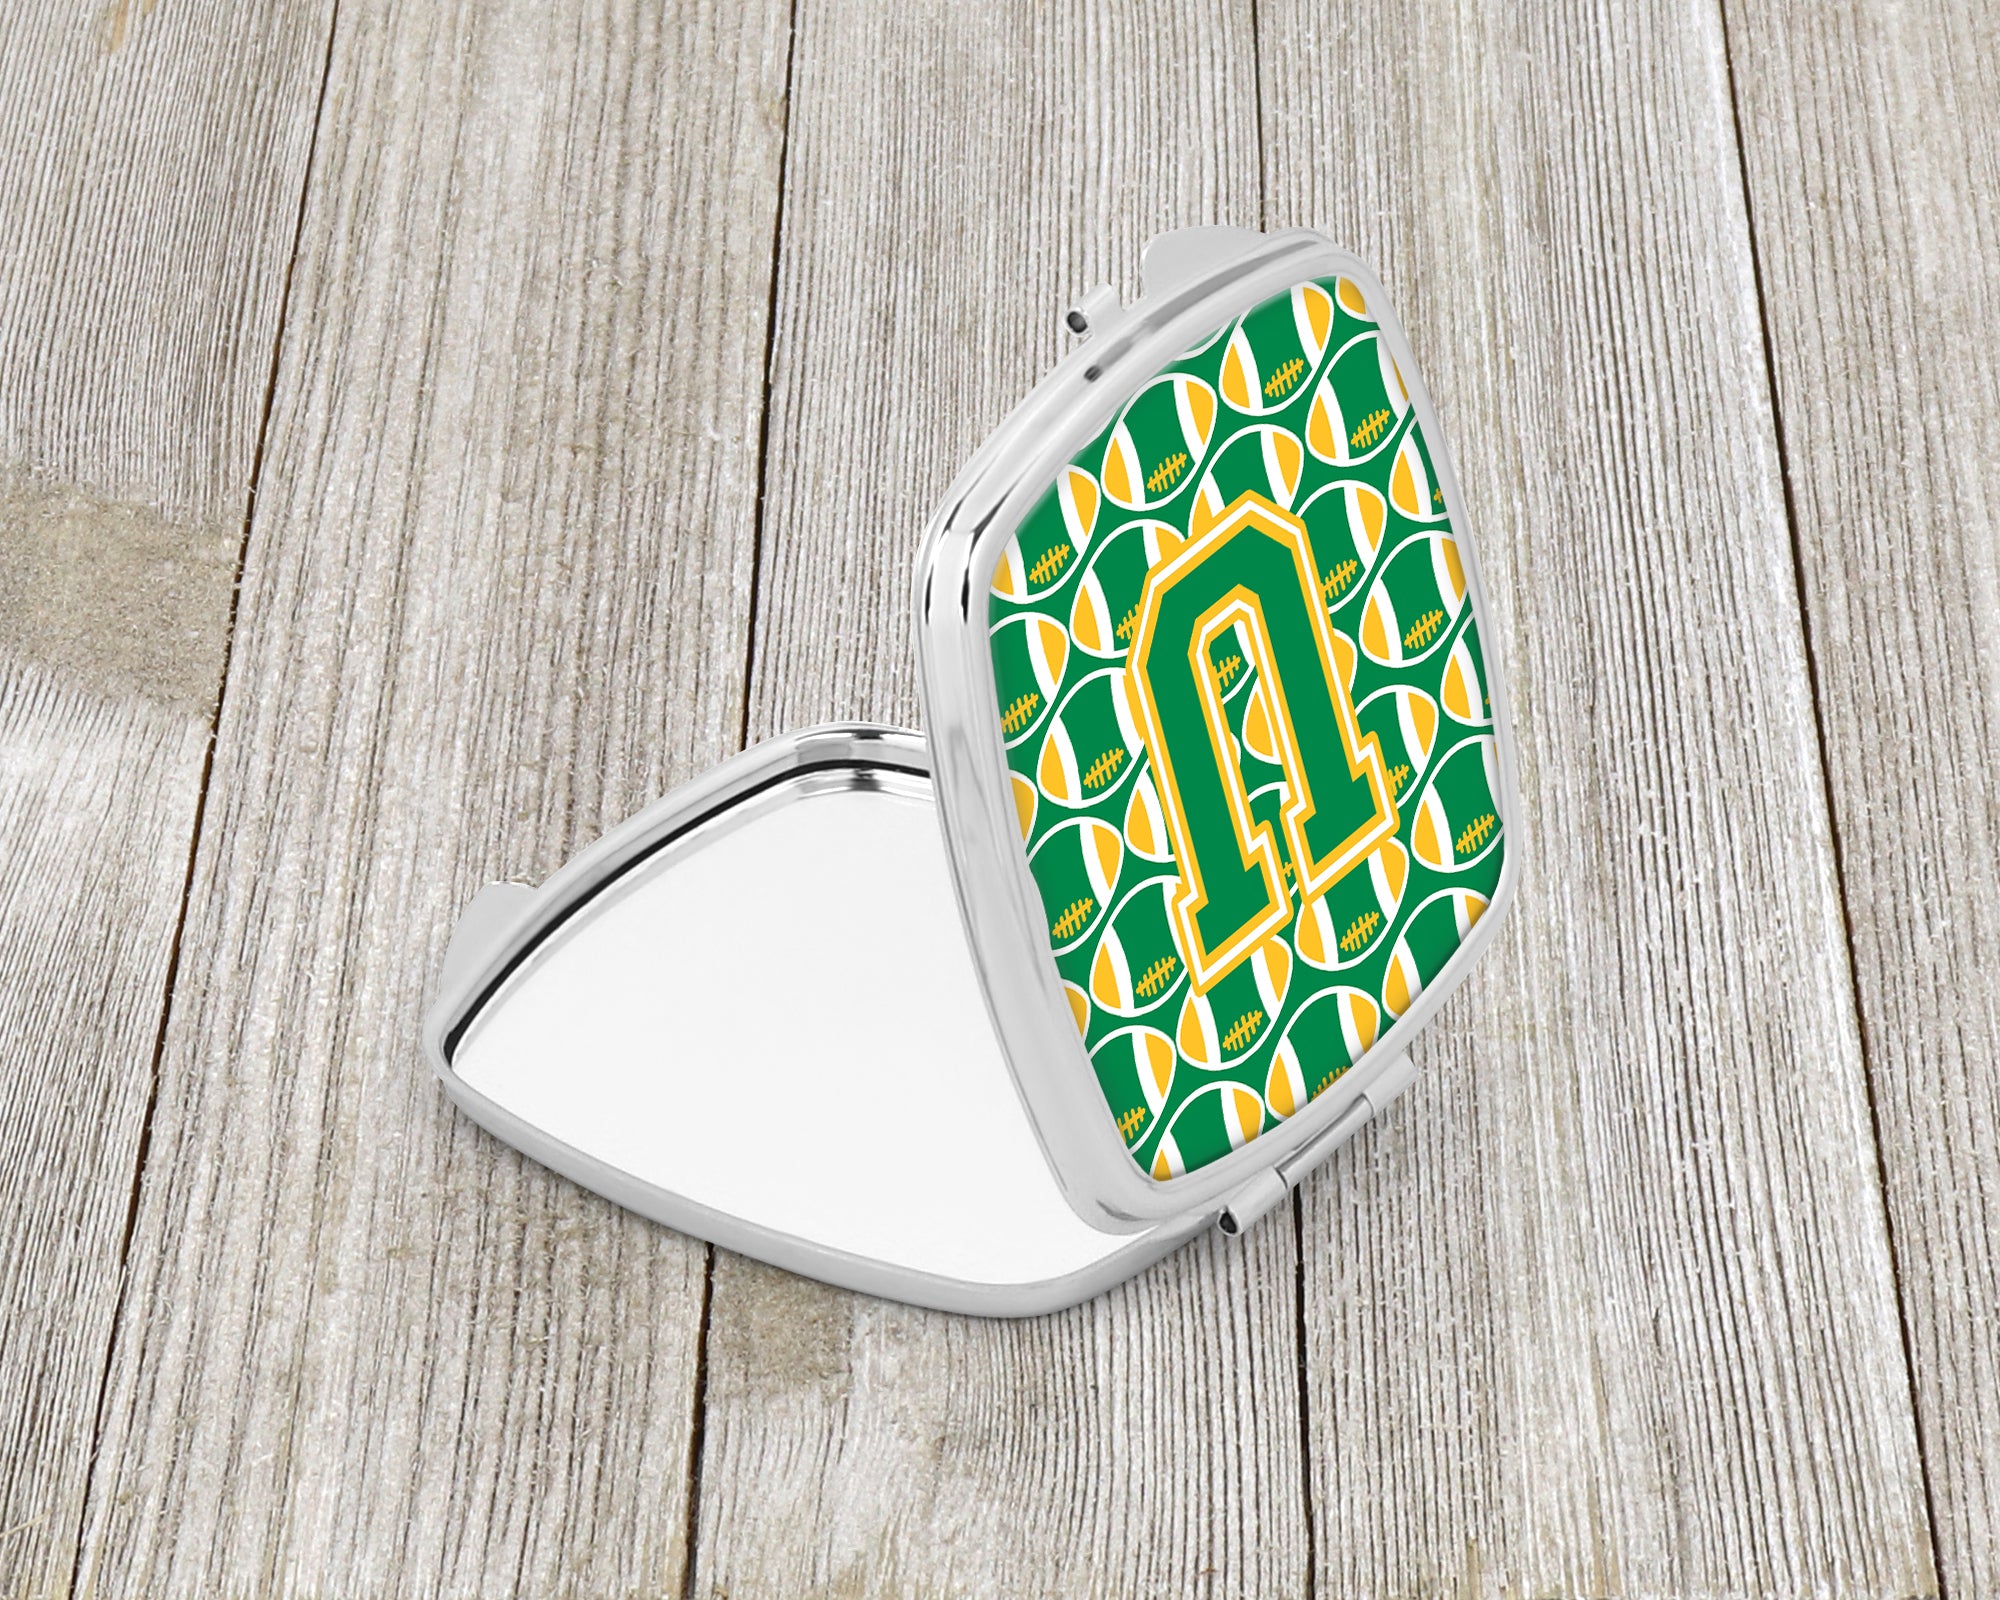 Letter U Football Green and Gold Compact Mirror CJ1069-USCM